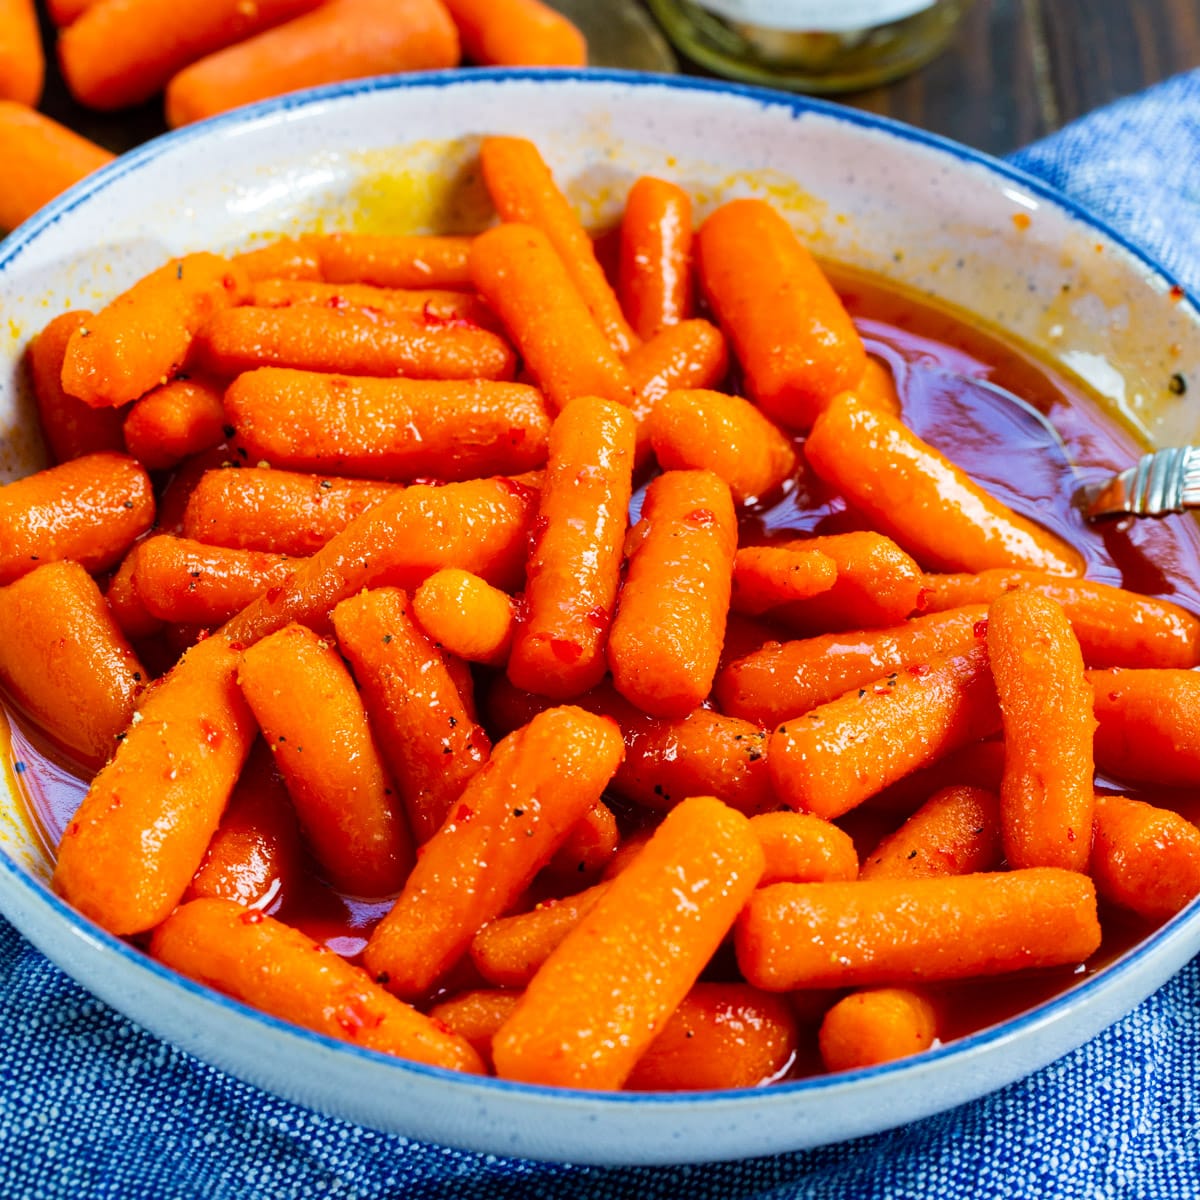 Pepper Jelly Glazed Carrots in a serving bowl.